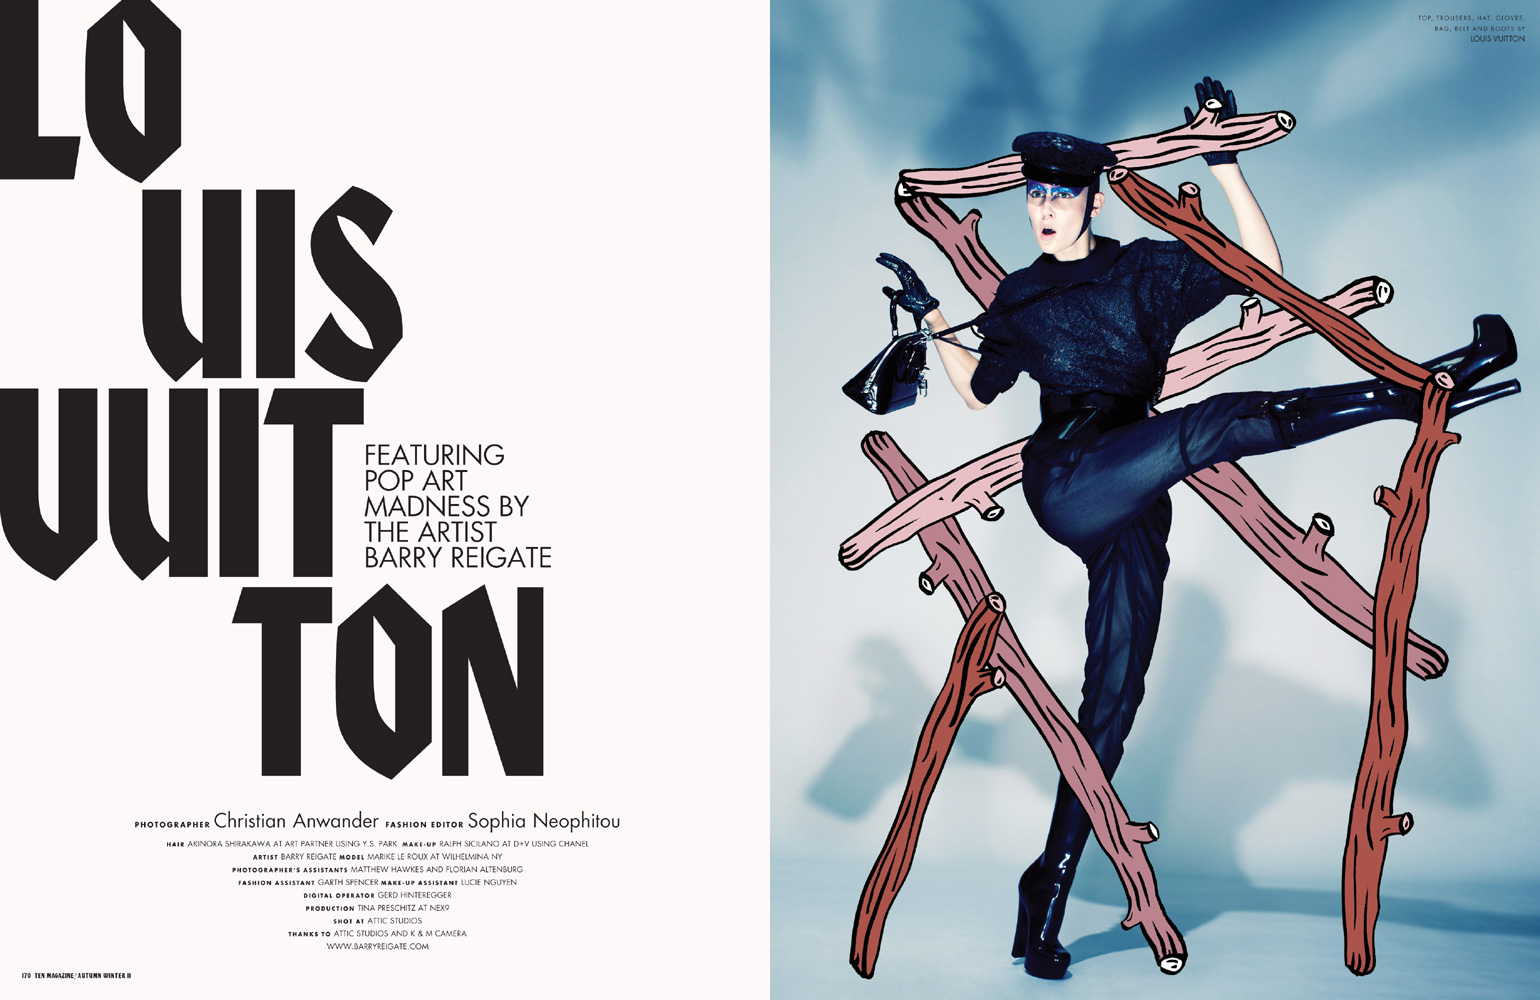 Louis Vuitton by Christian Anwander for 10 Magazine